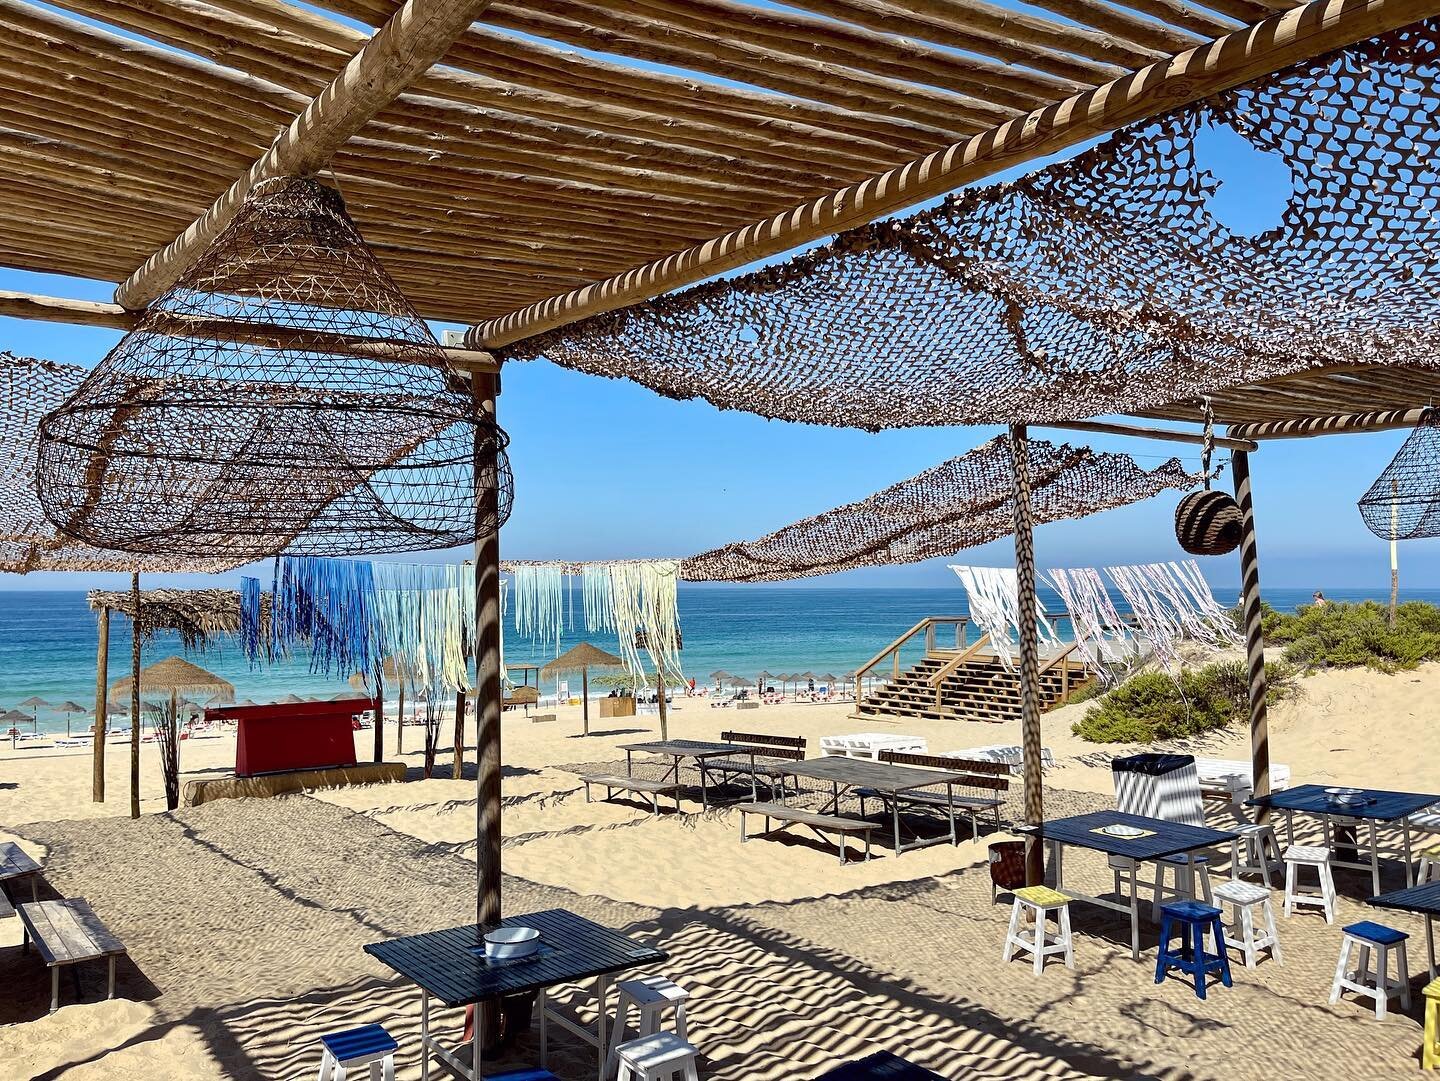 Isn&rsquo;t this lovely? Layers dance to the sound of the waves, as the morning breeze rocks by&hellip;
Last summer with our friends @restaurante_sal_comporta but great things are yet to come.

#comporta #portugal #beautifuldestinations #oldfriends #